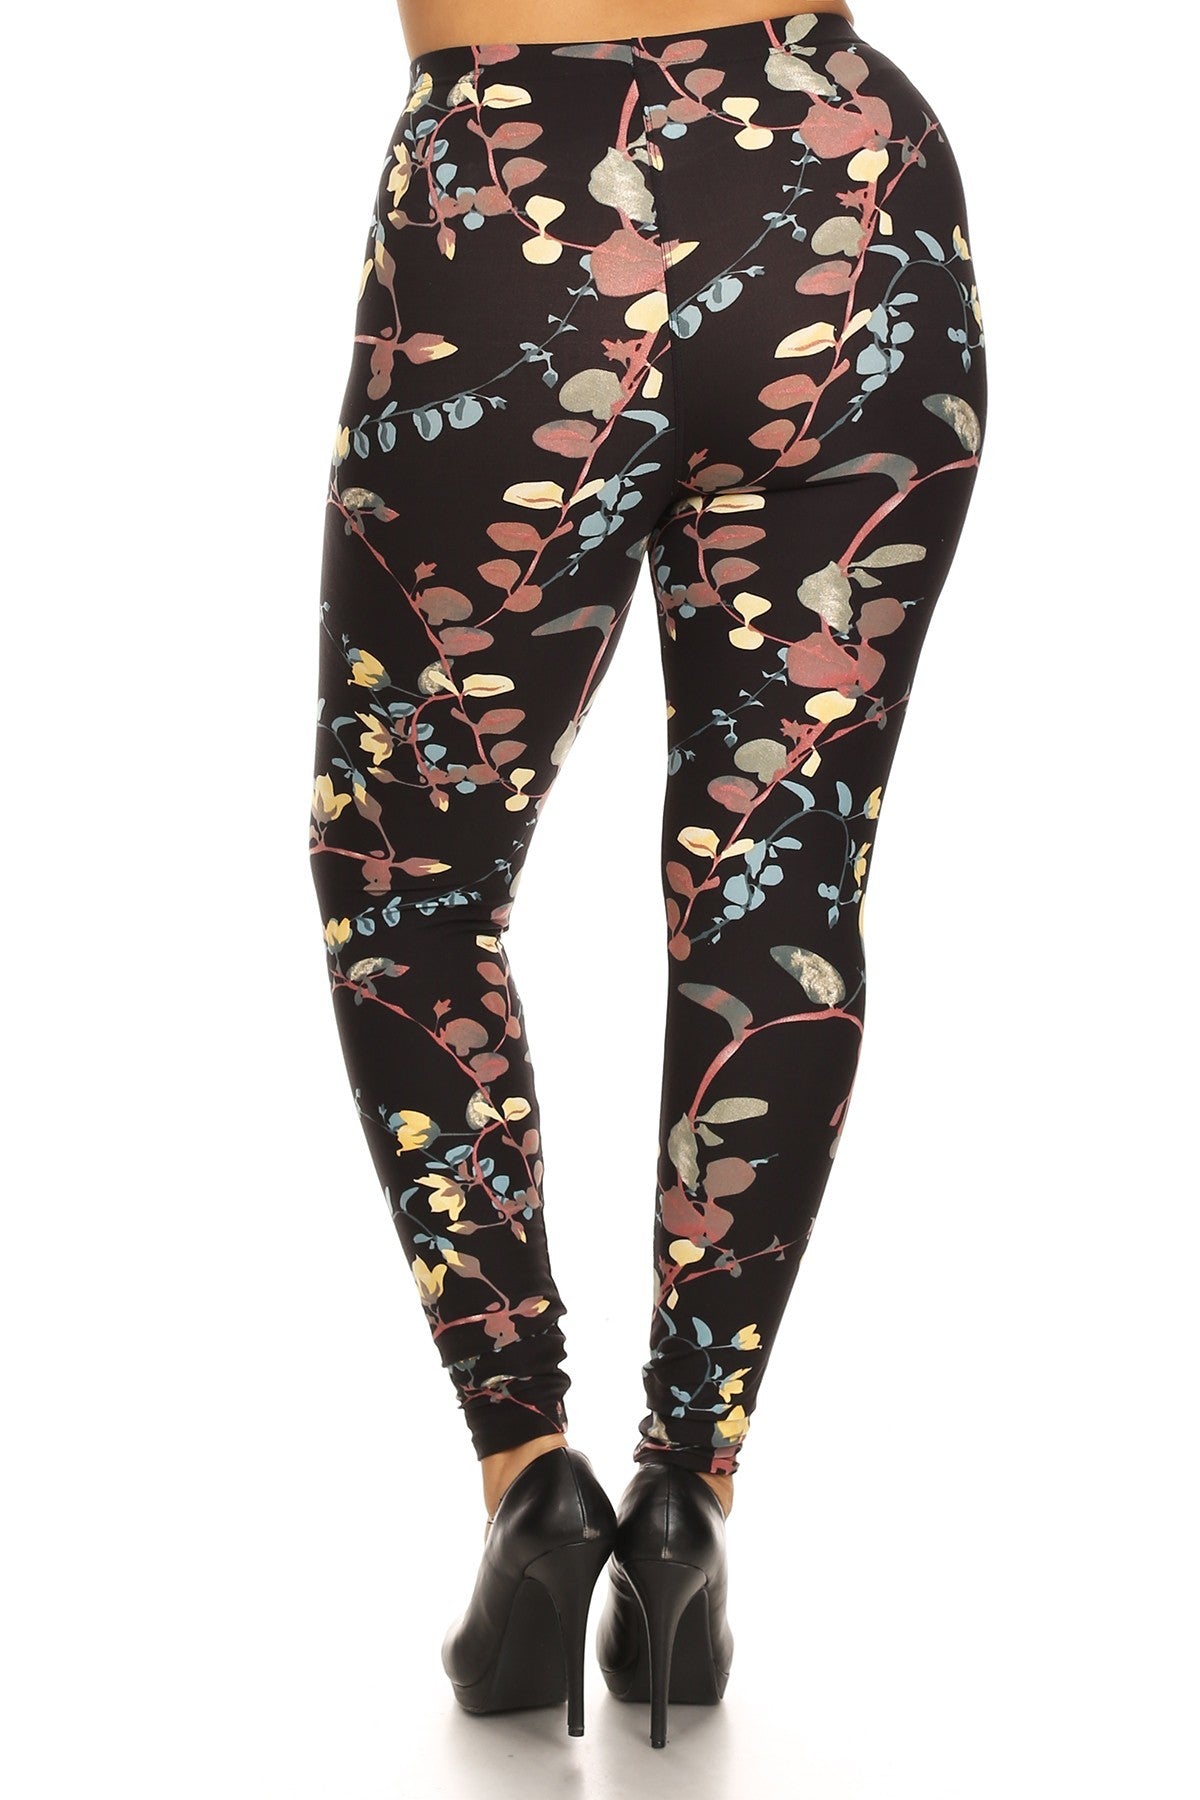 Full Length Leggings In A Slim Fitting Style With A Banded High Waist